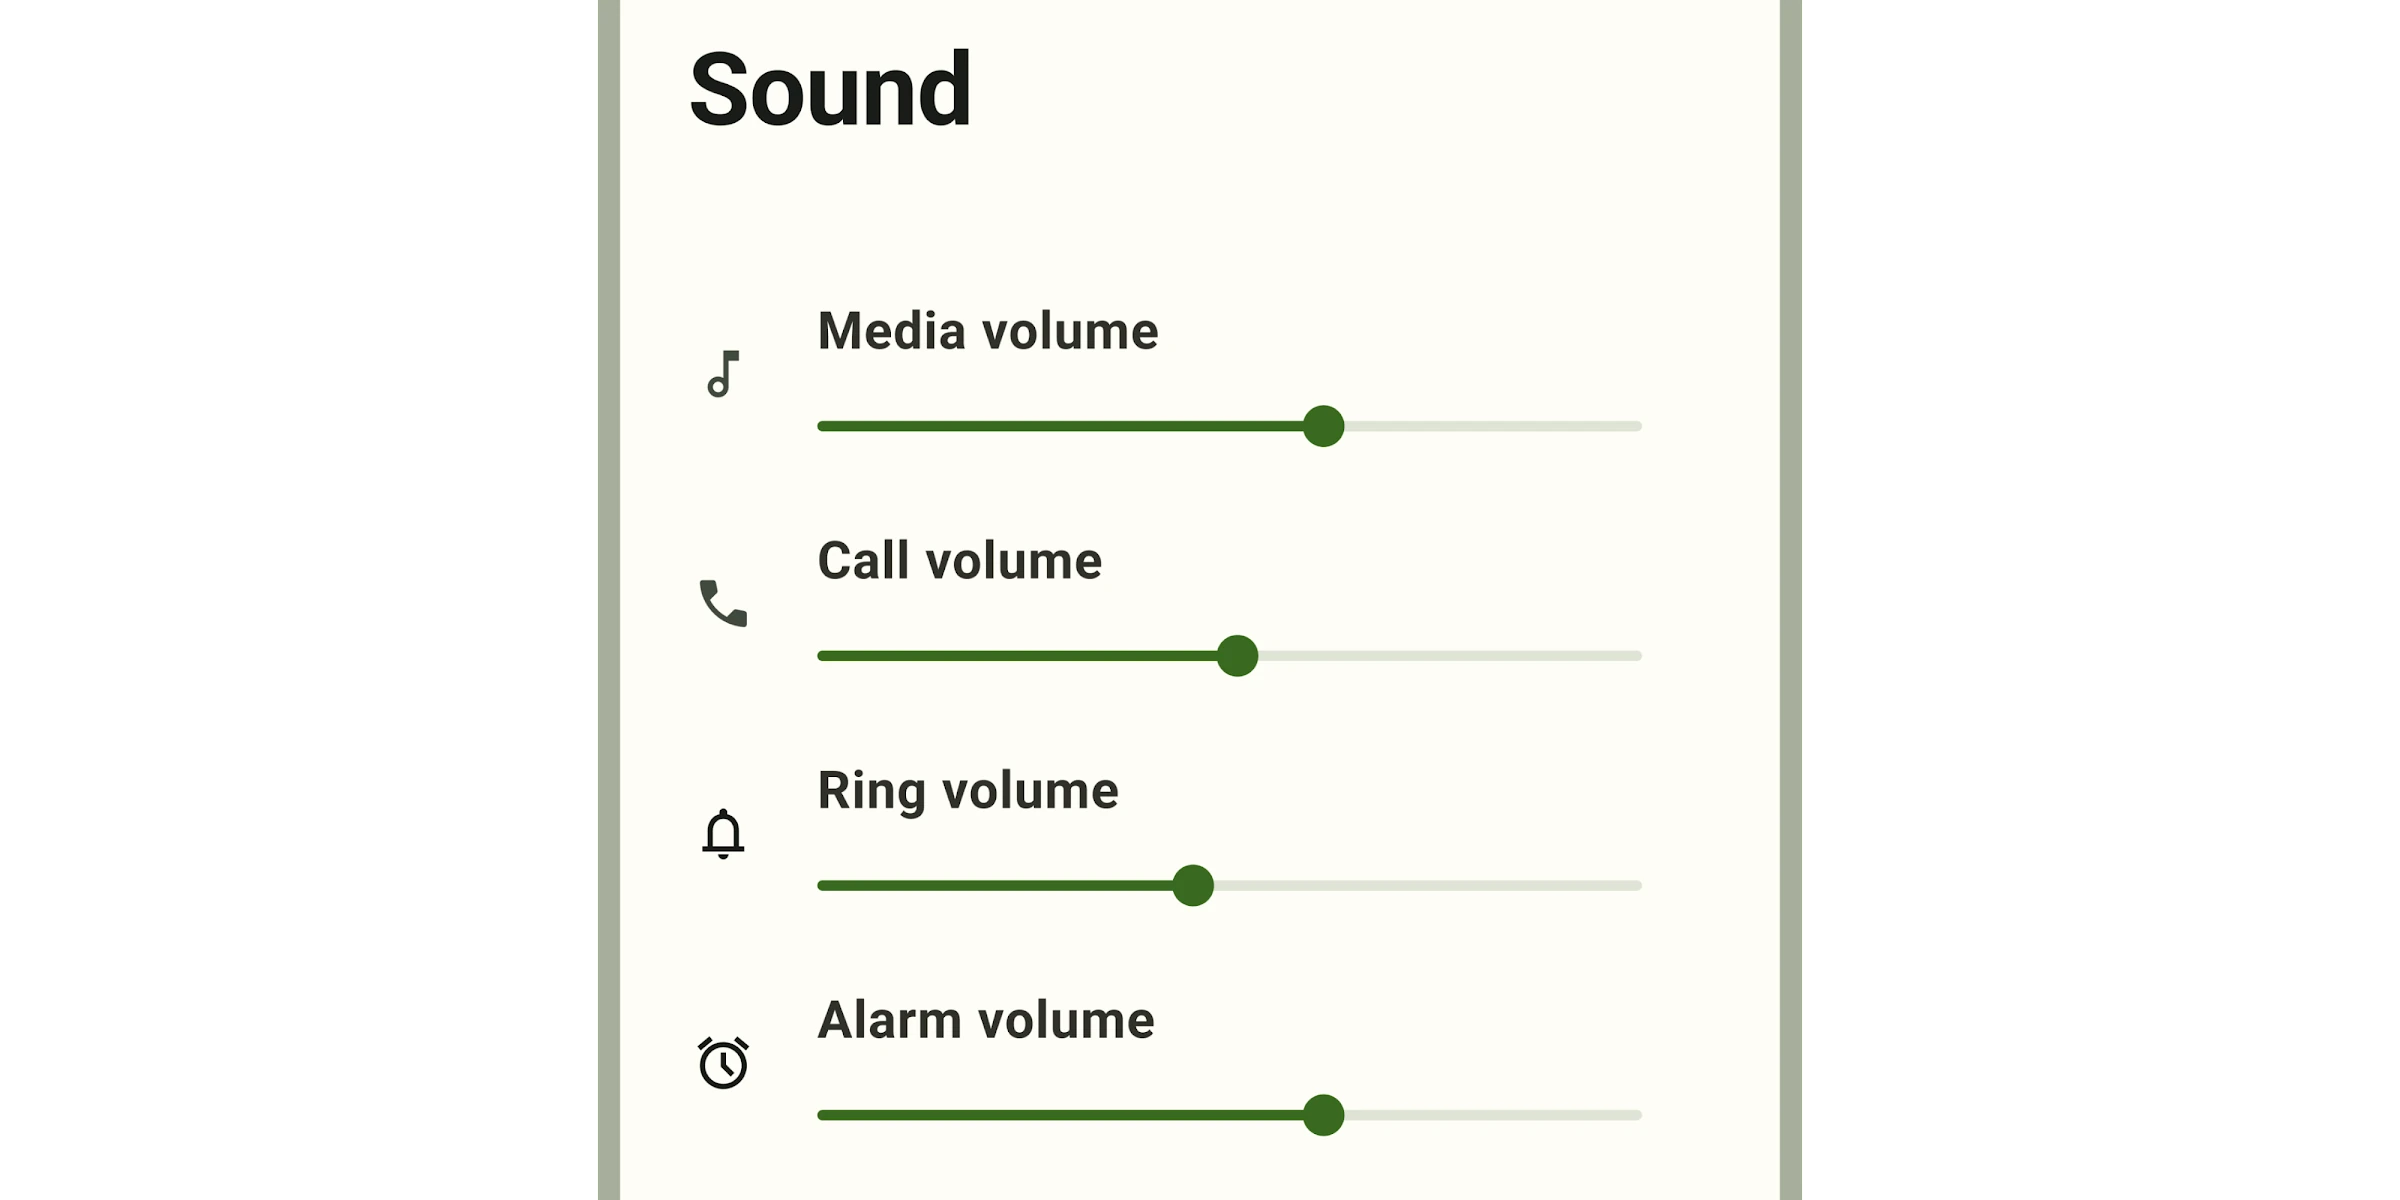 Sound settings screen with sliders labeled 'Media volume', and 'Call volume'.